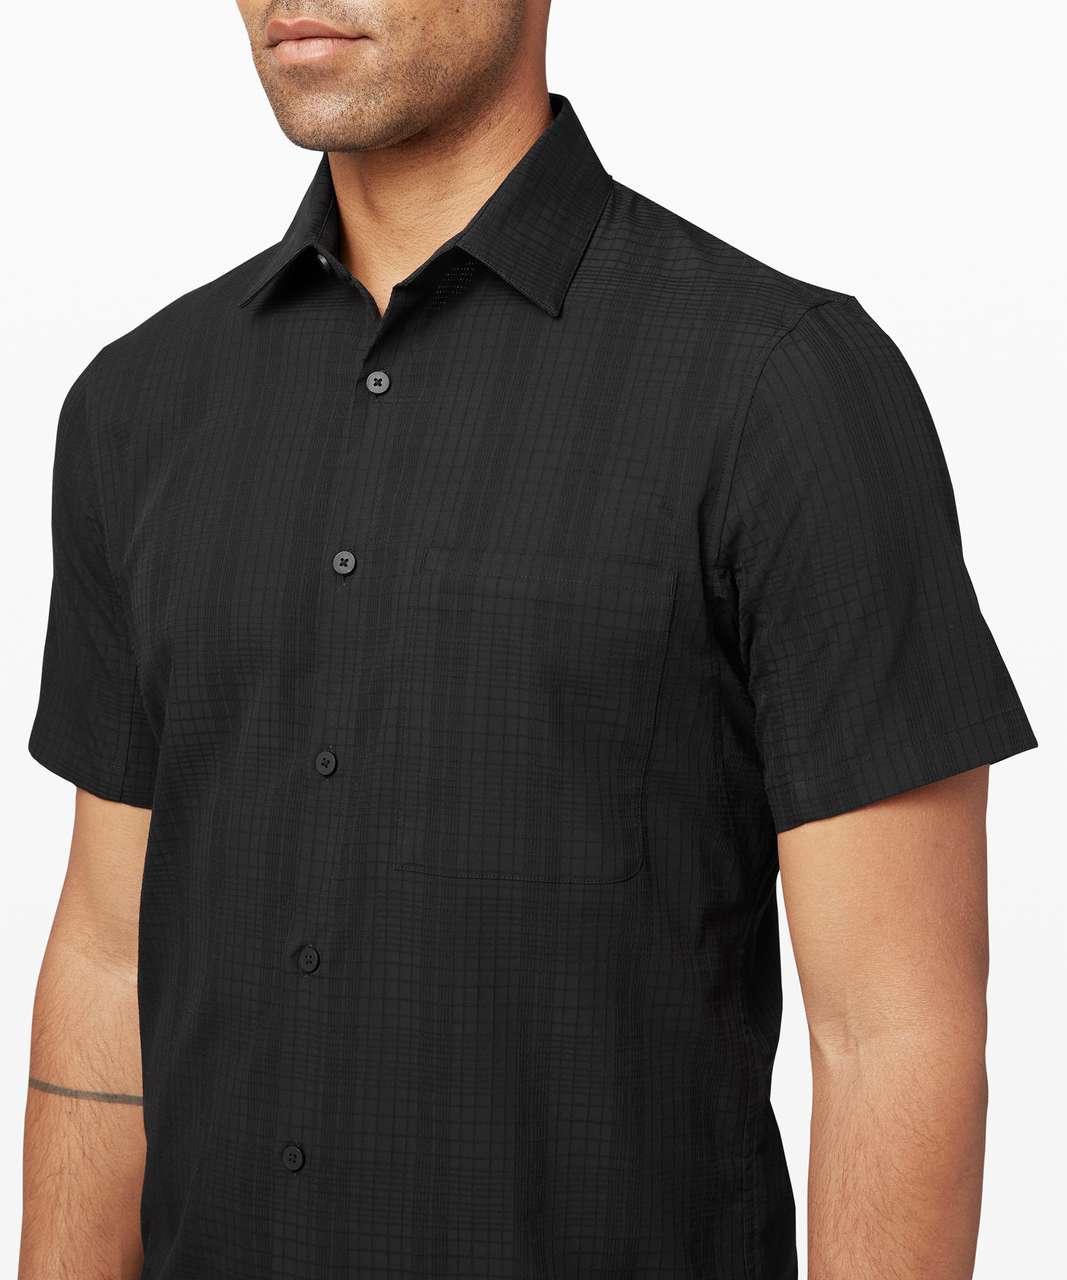 Lululemon Down to the Wire Short Sleeve Shirt - Black